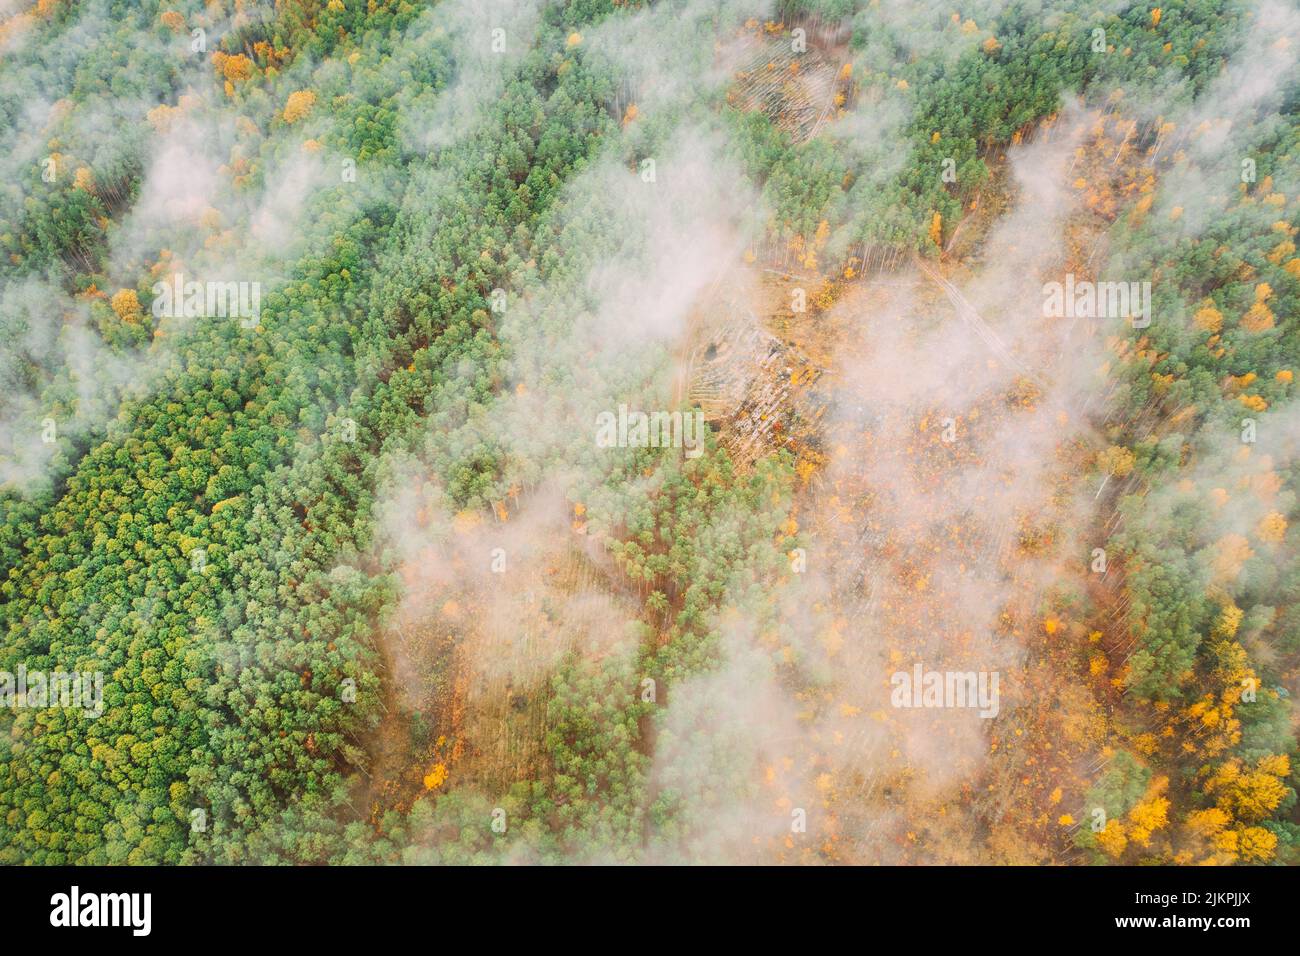 Aerial view of a logging zone cuts through forest. Bush fire and smoke in deforestation zone. Wild open fire destroys grass. Nature in danger Stock Photo